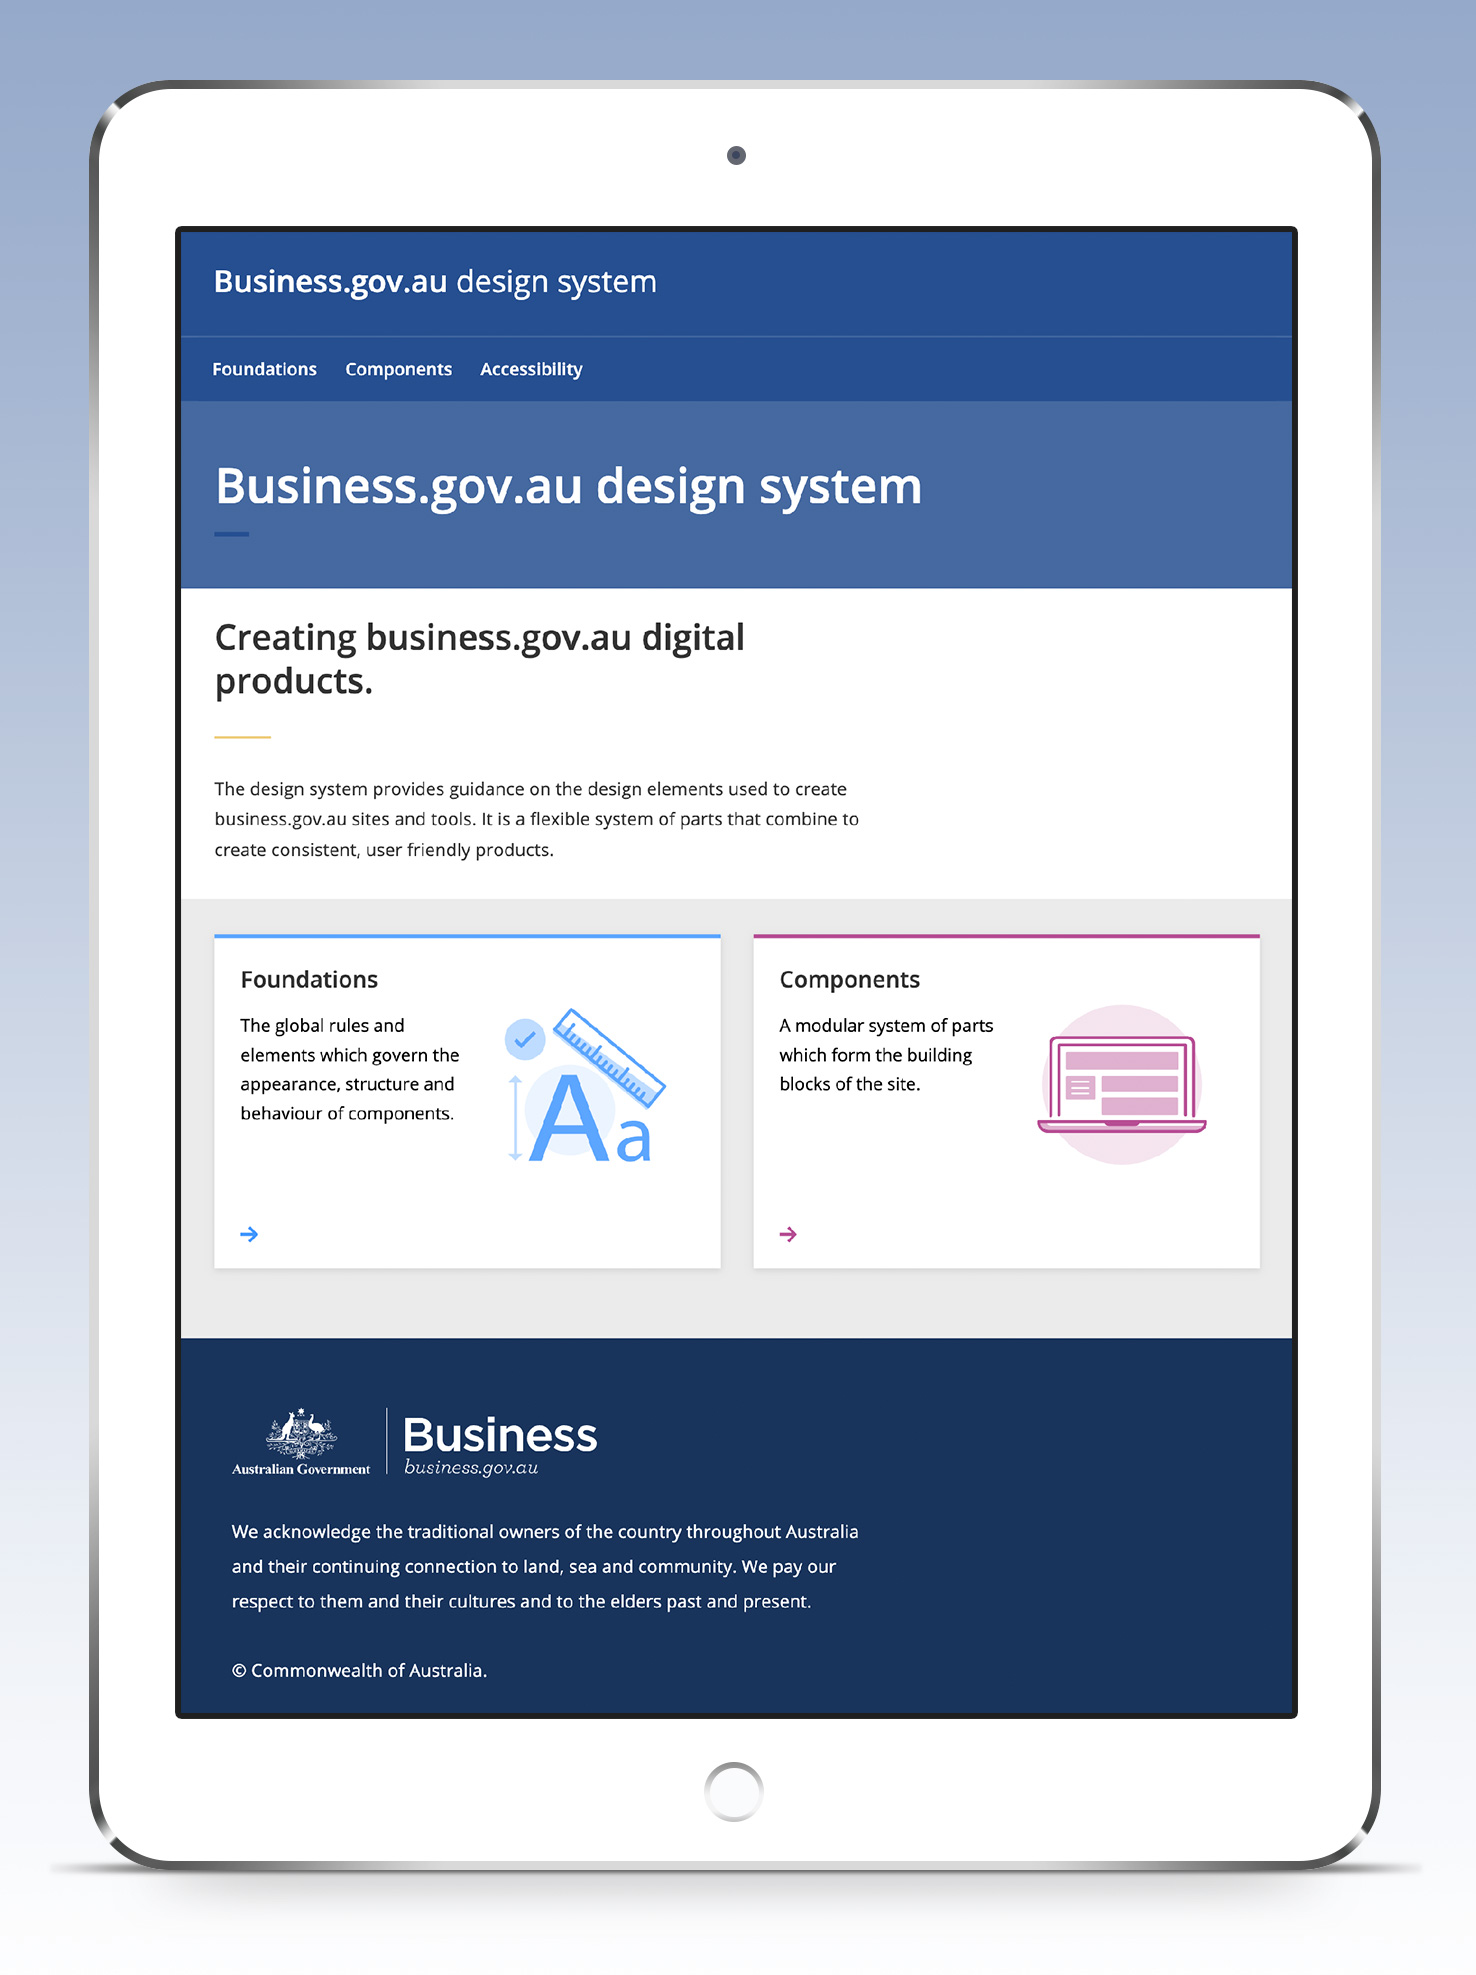 An ipad showing the BGA design system home page